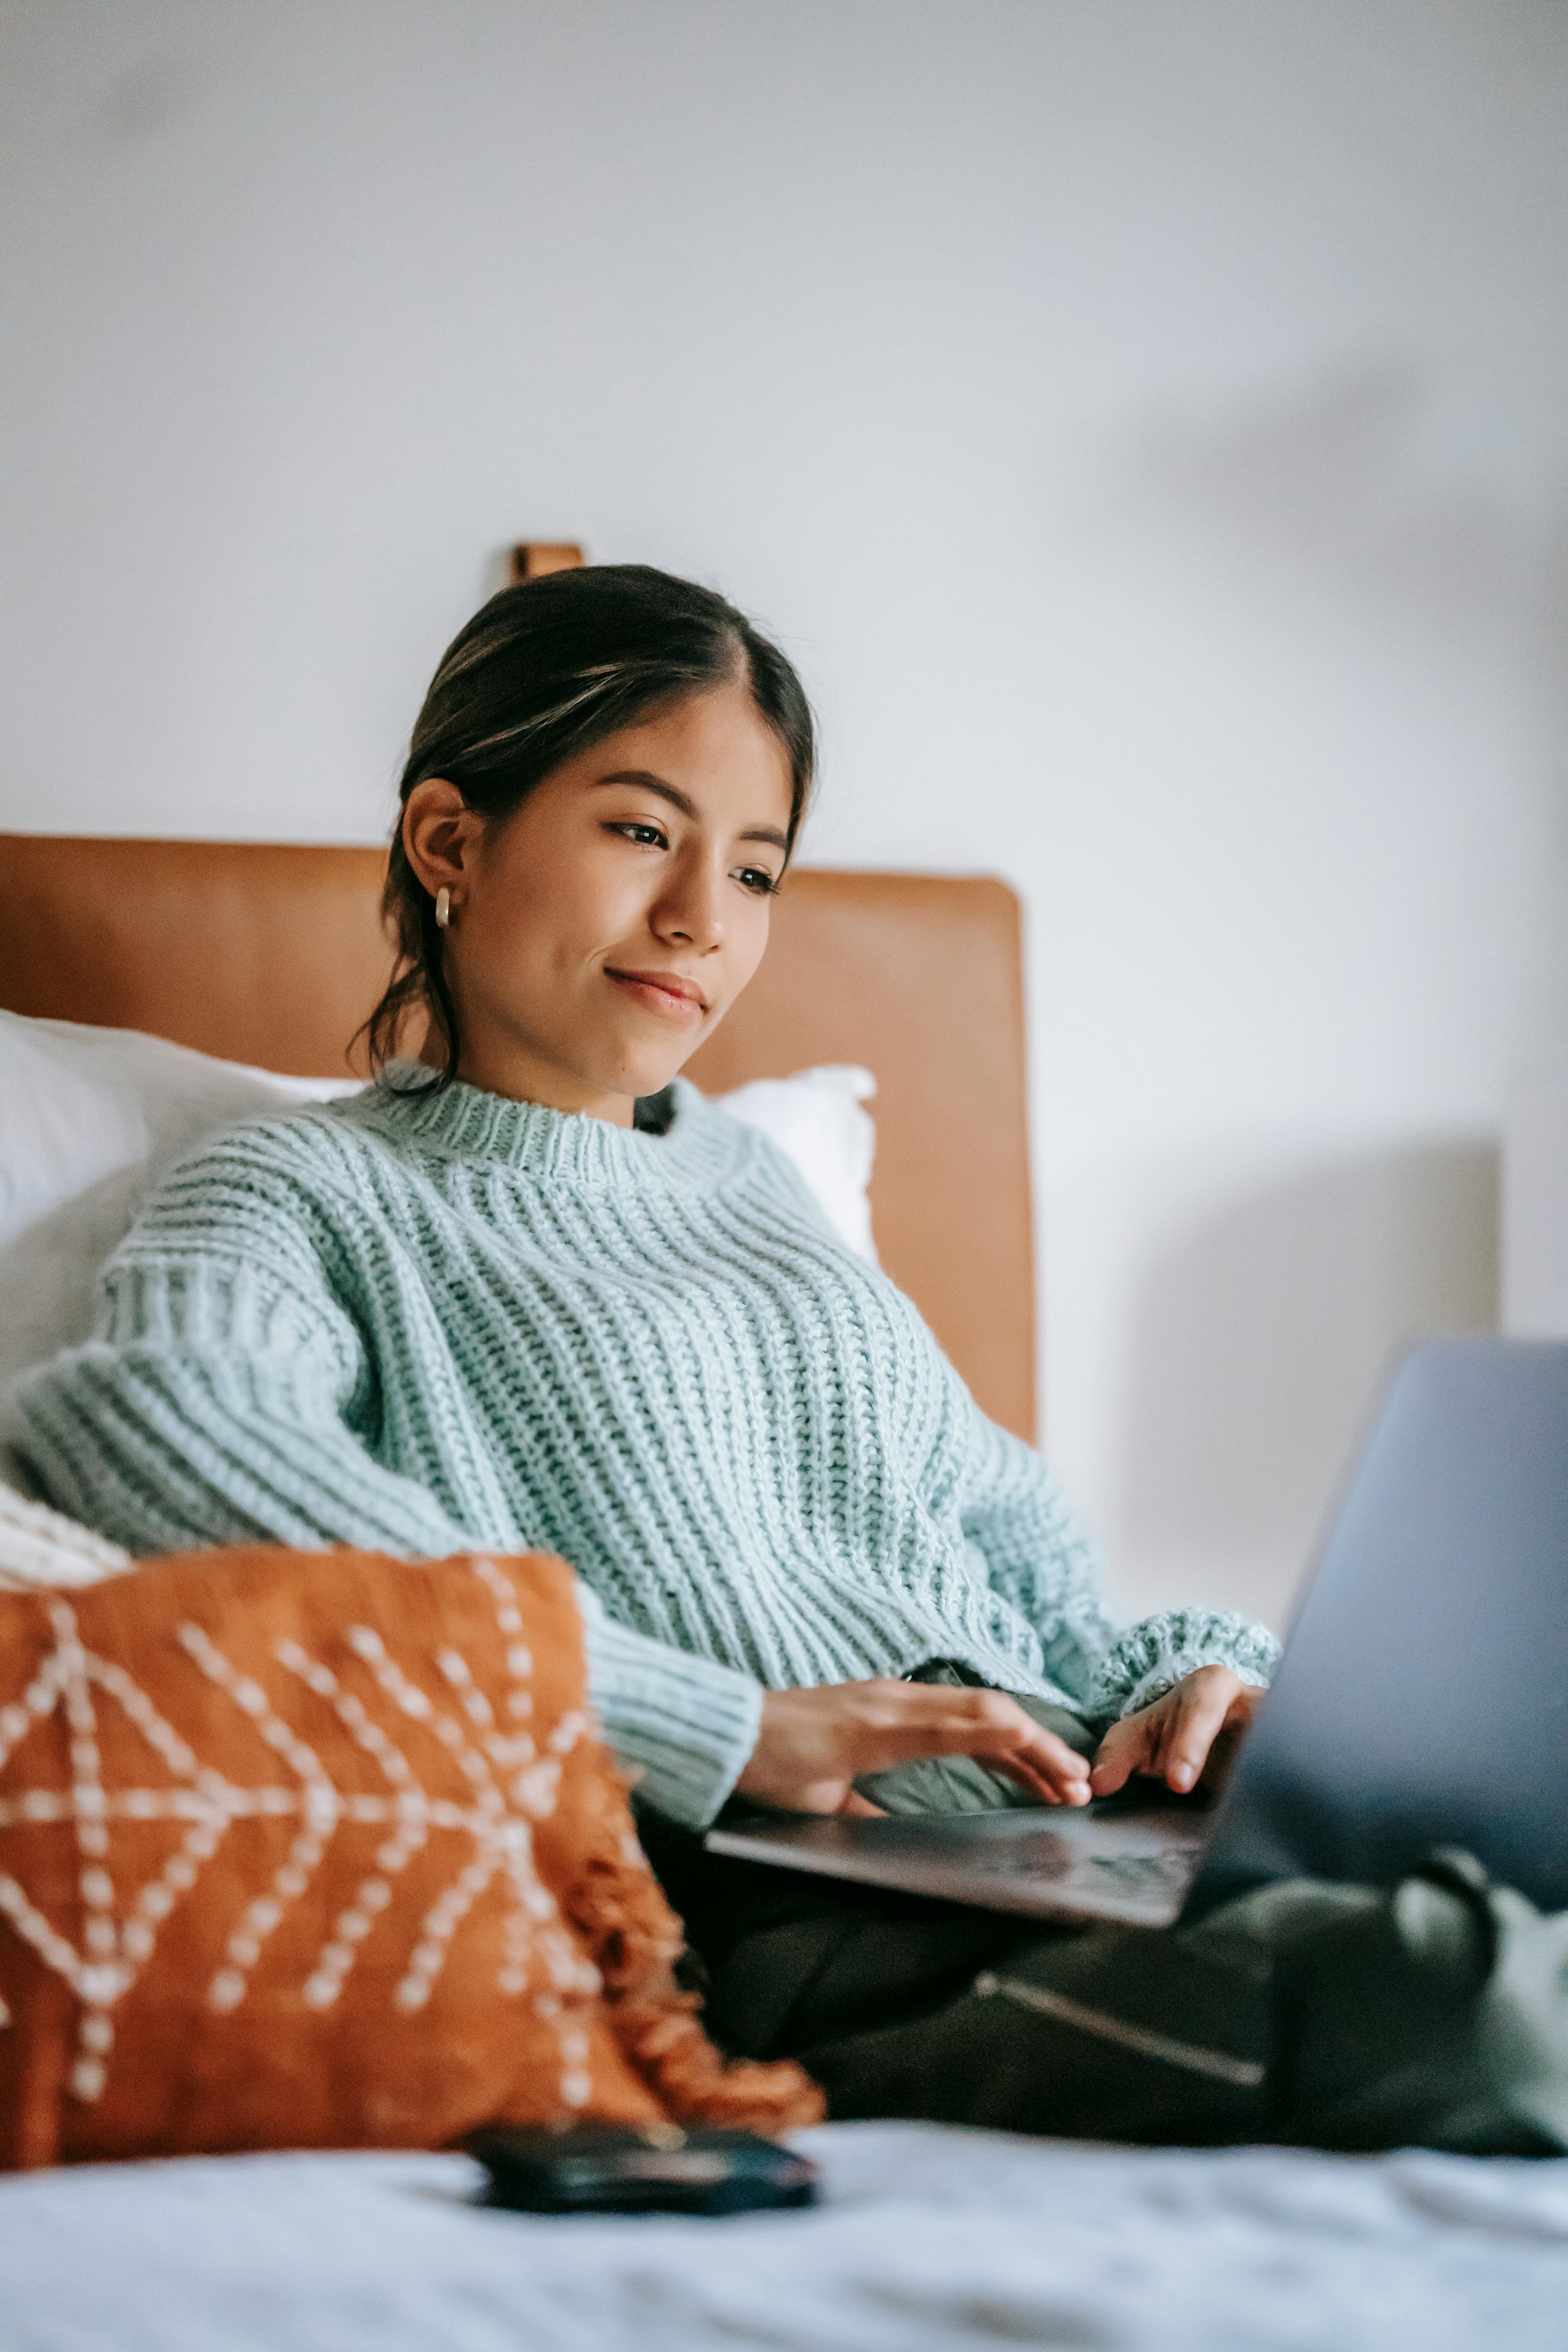 content young ethnic woman freelancing with laptop on bed